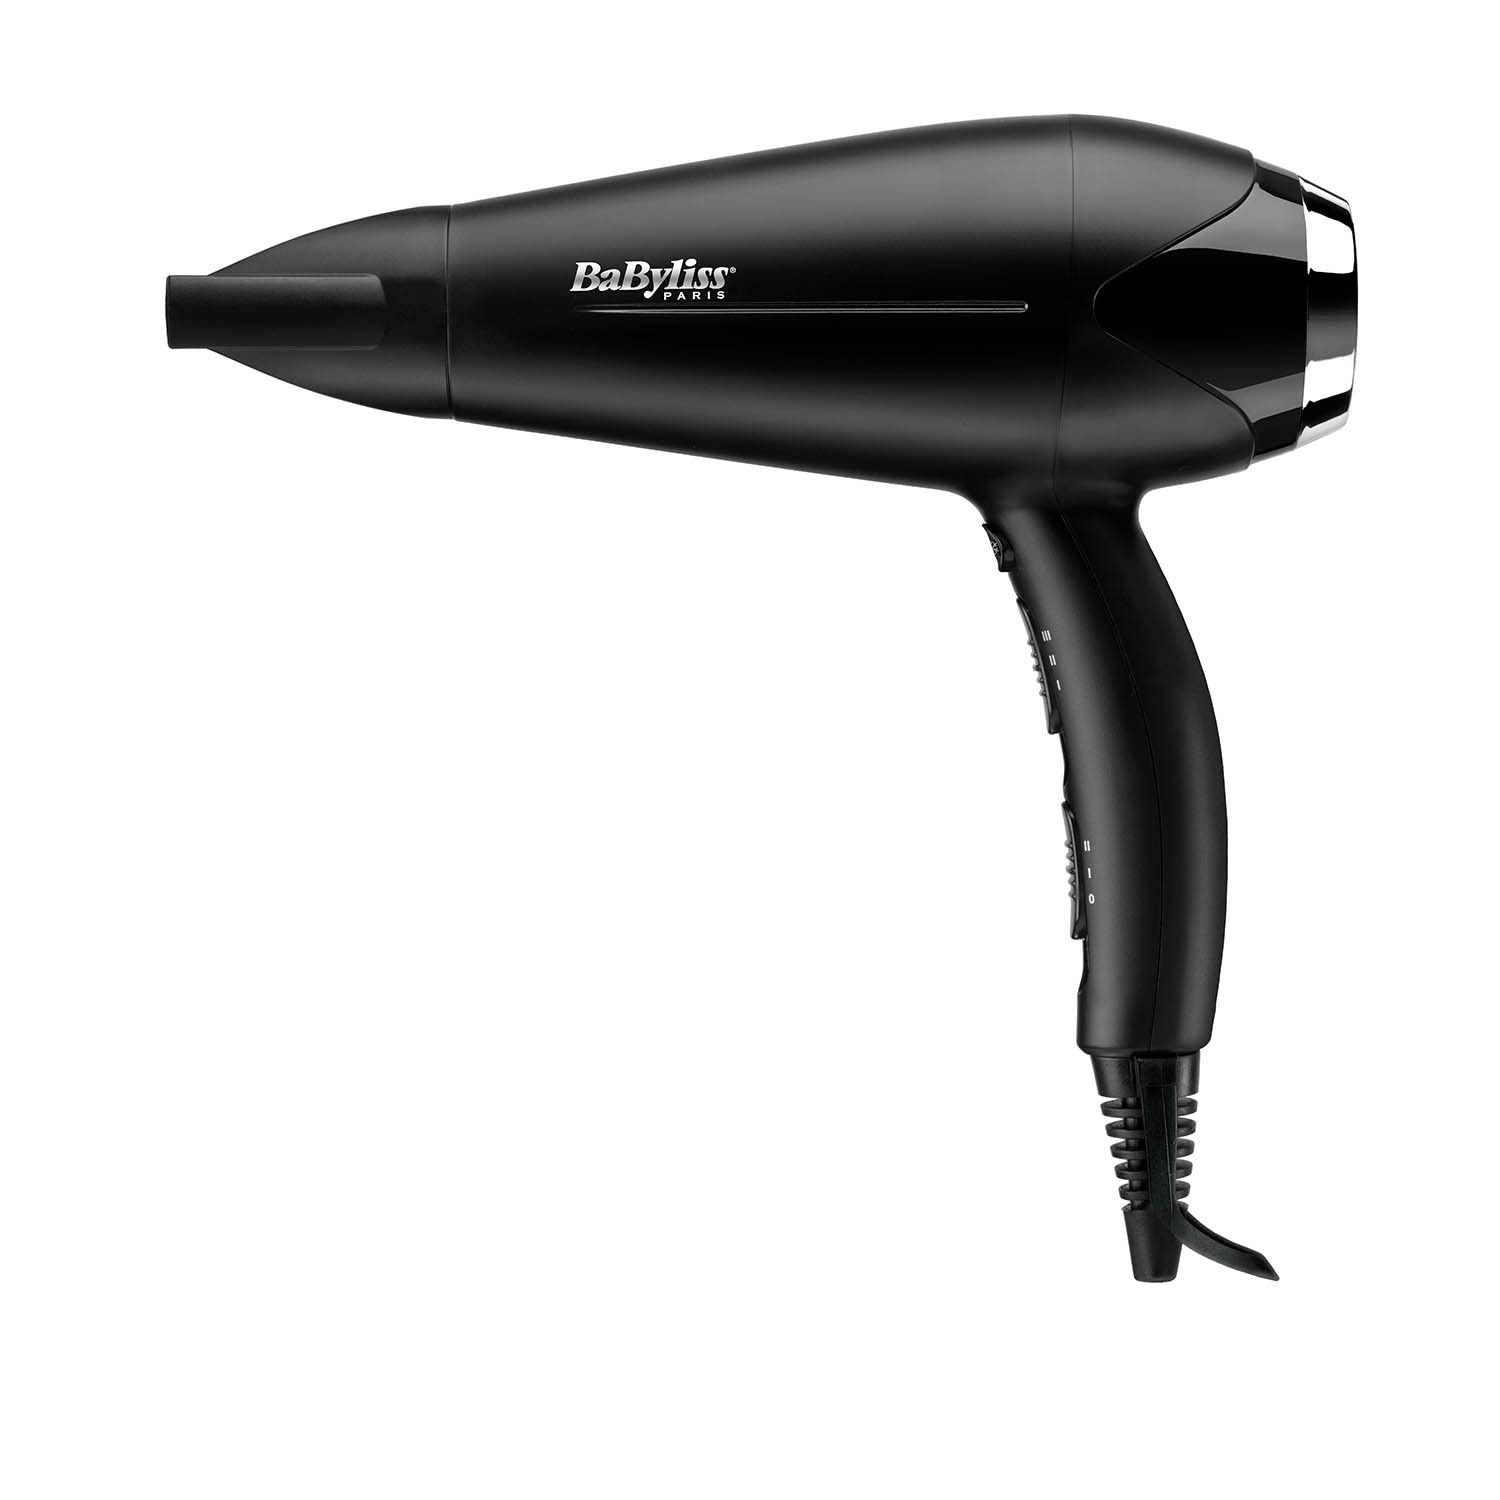 BaByliss Turbo Smooth 2200 Hair Dryer| Powerful Dryer